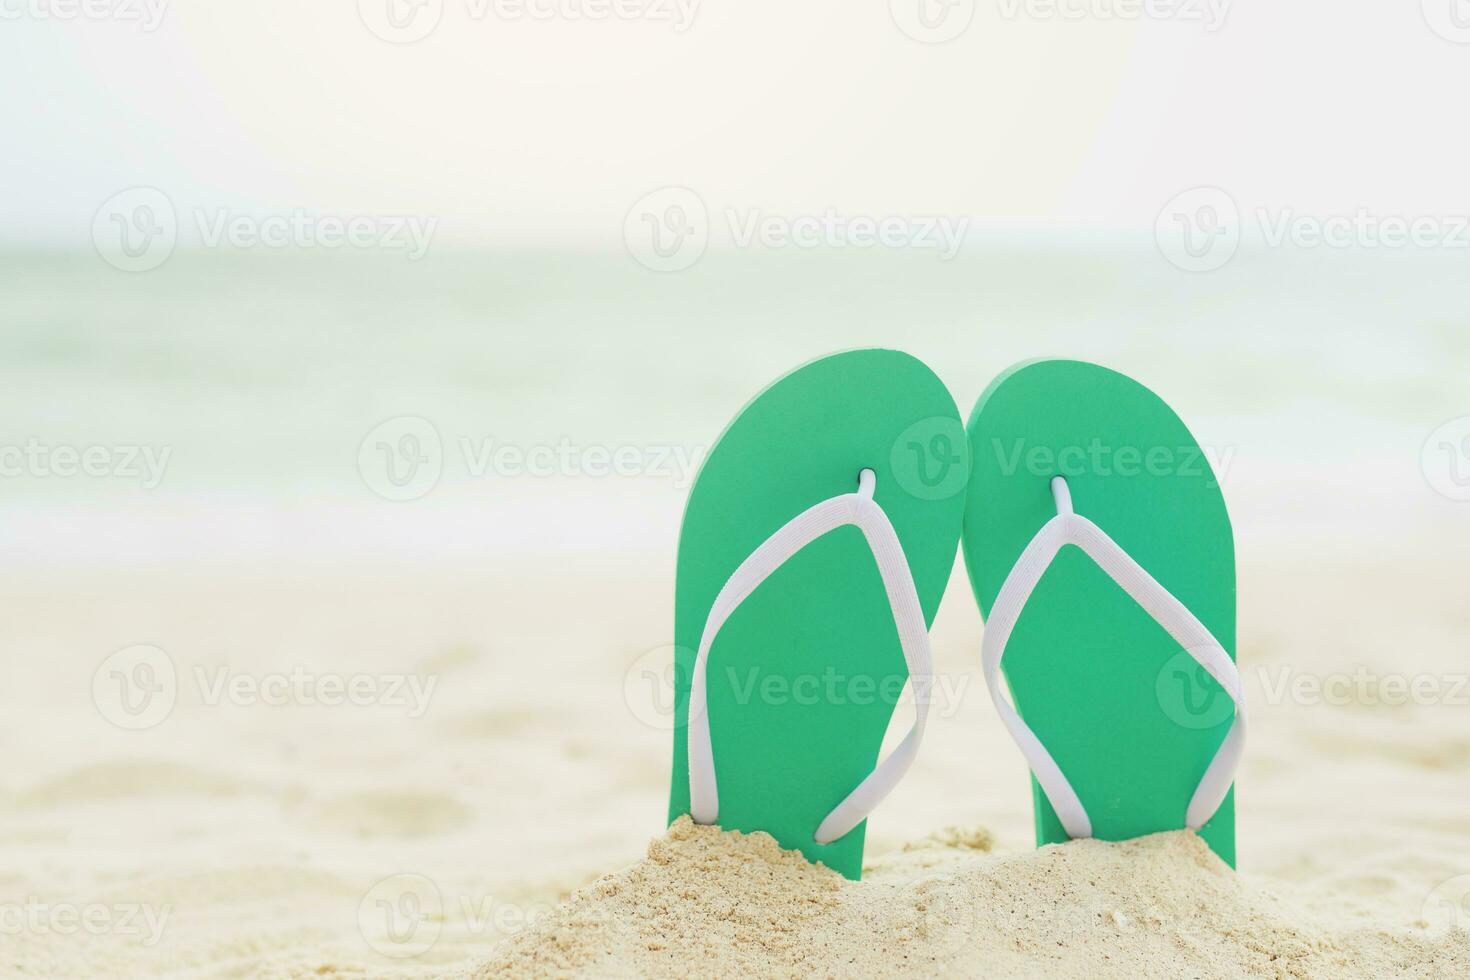 sea on the beach Footprint  people on the sand and slipper of feet in sandals shoes on beach sands background. travel holidays concept. photo